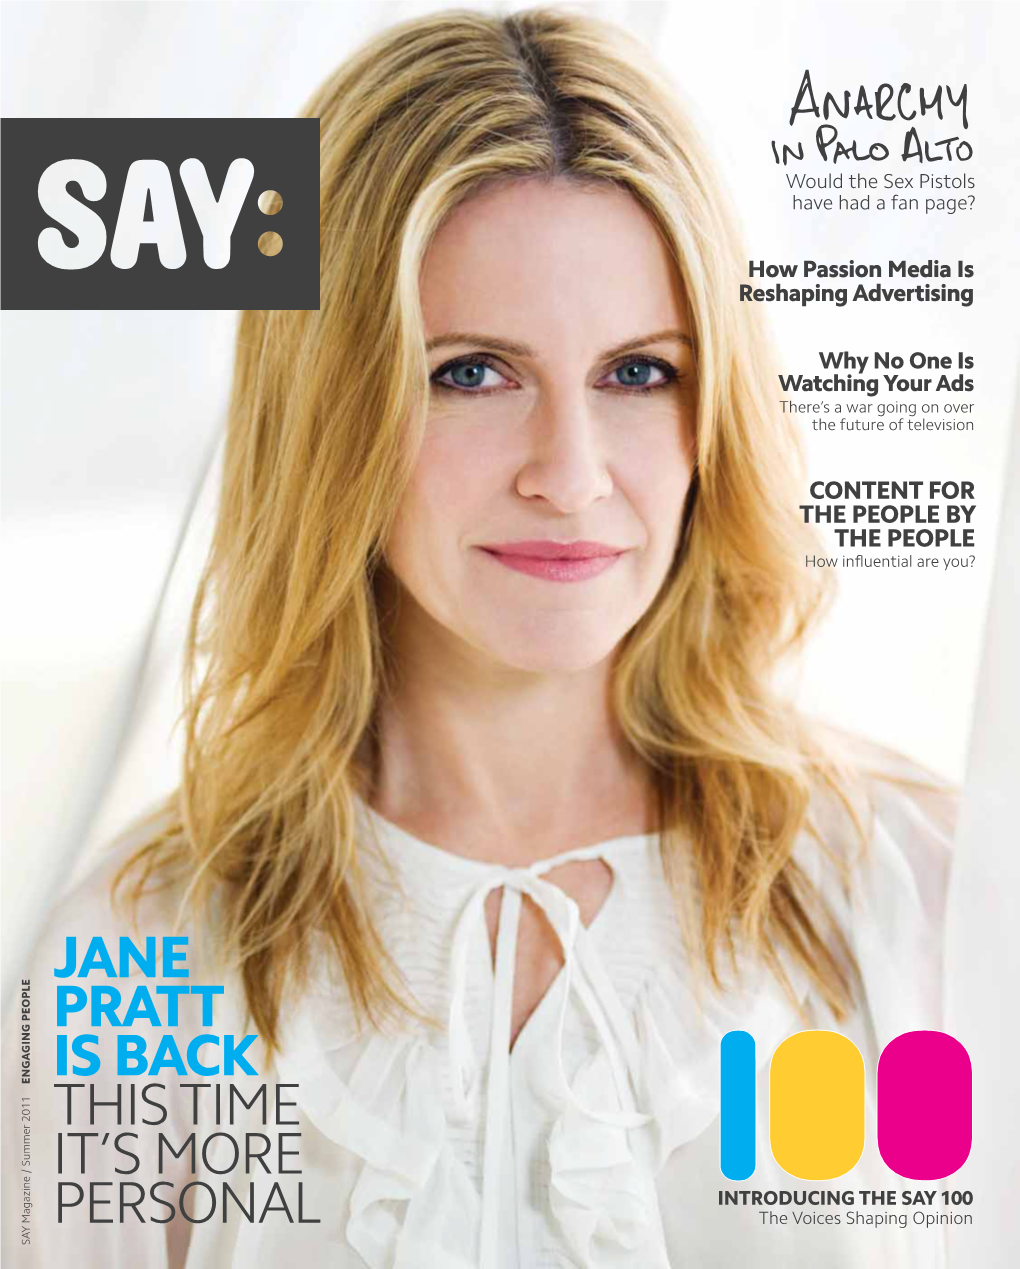 Jane Pratt Is Back This Time It's More Personal